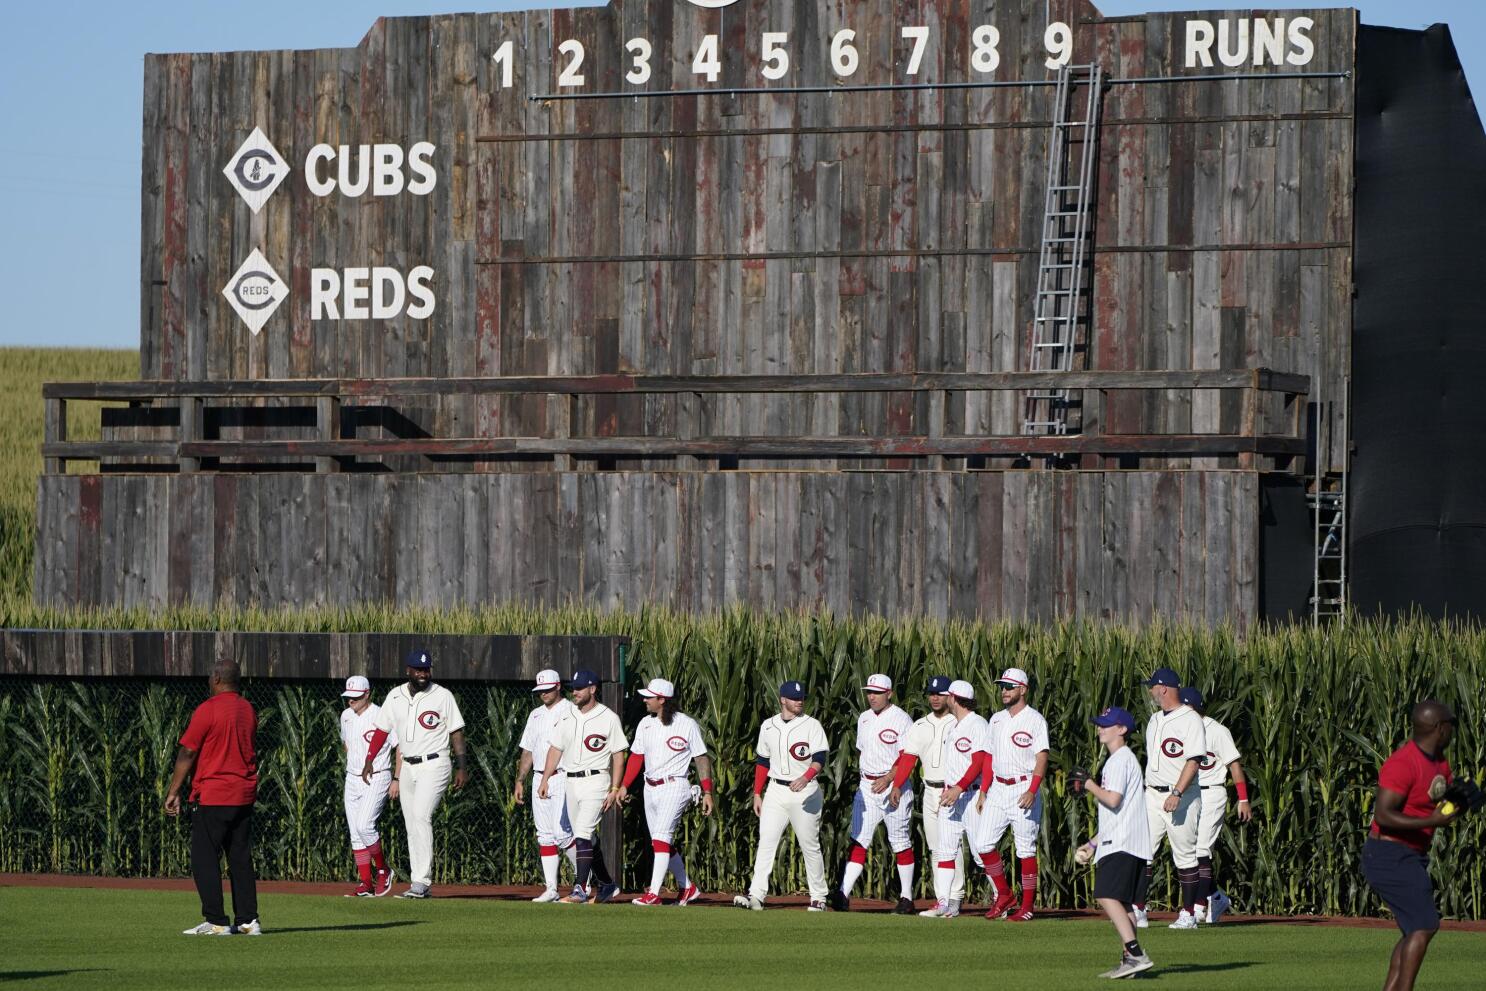 reds uniforms for field of dreams game